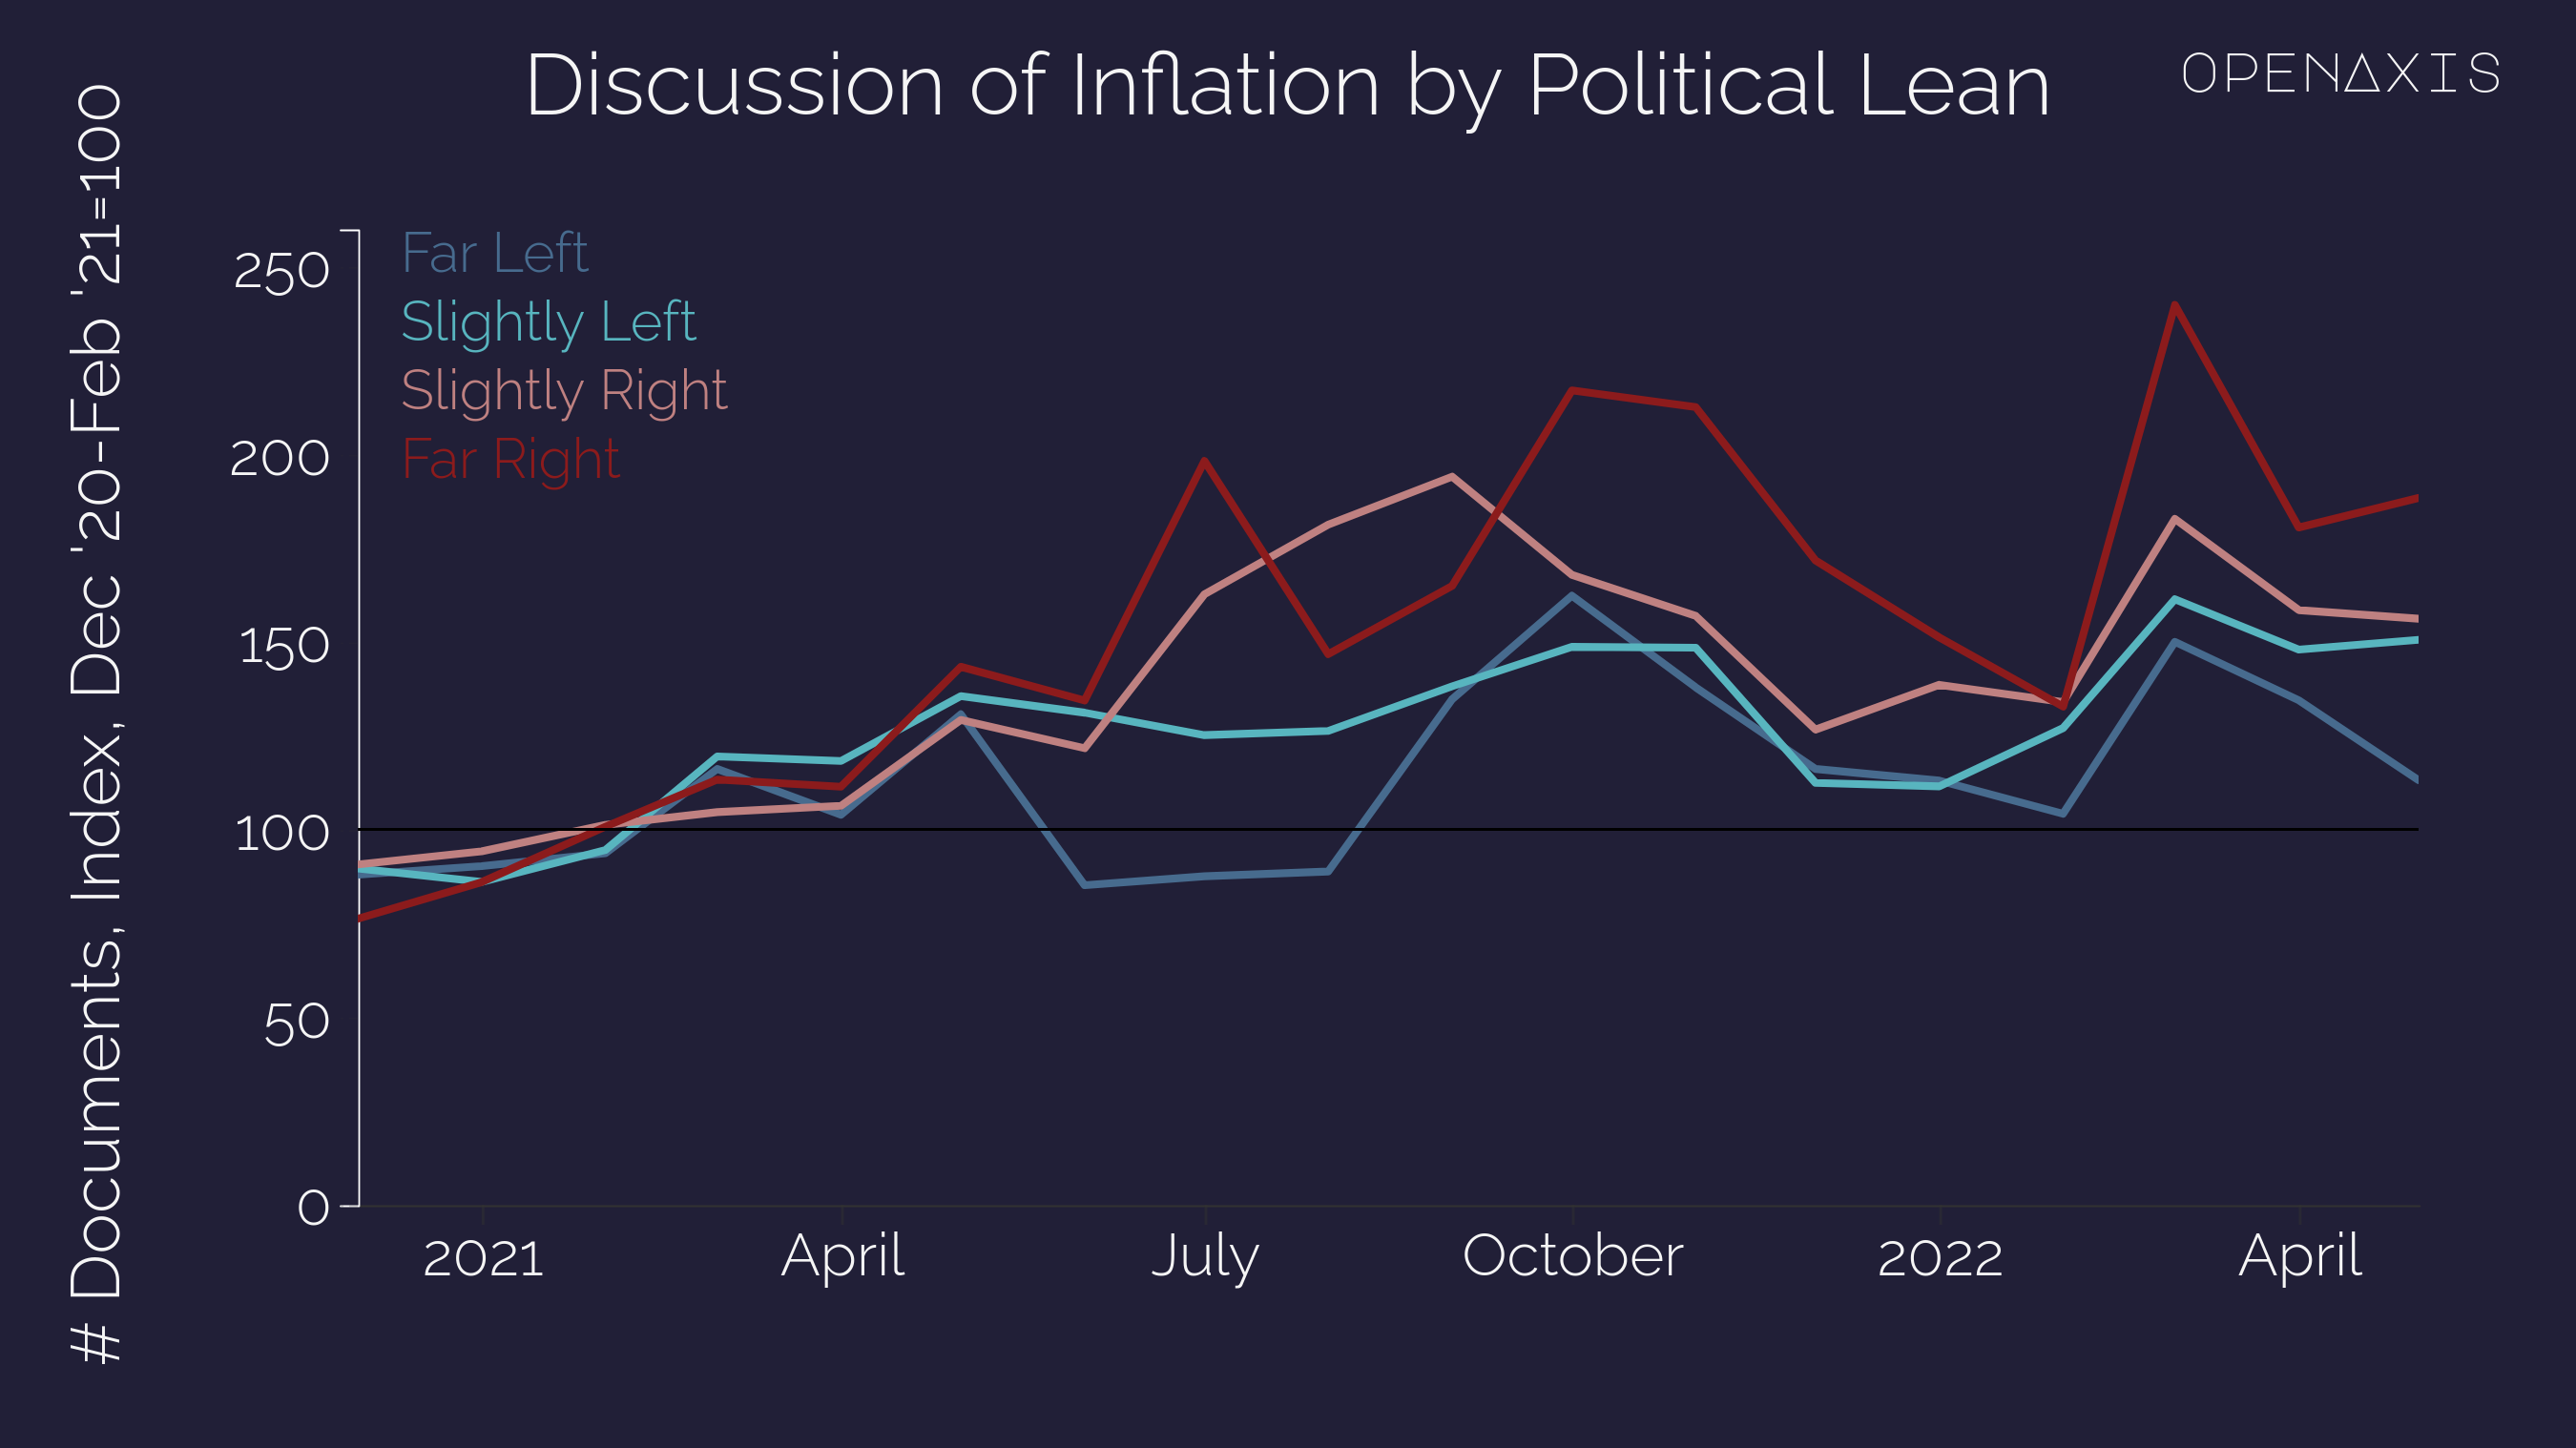 "Discussion of Inflation by Political Lean"